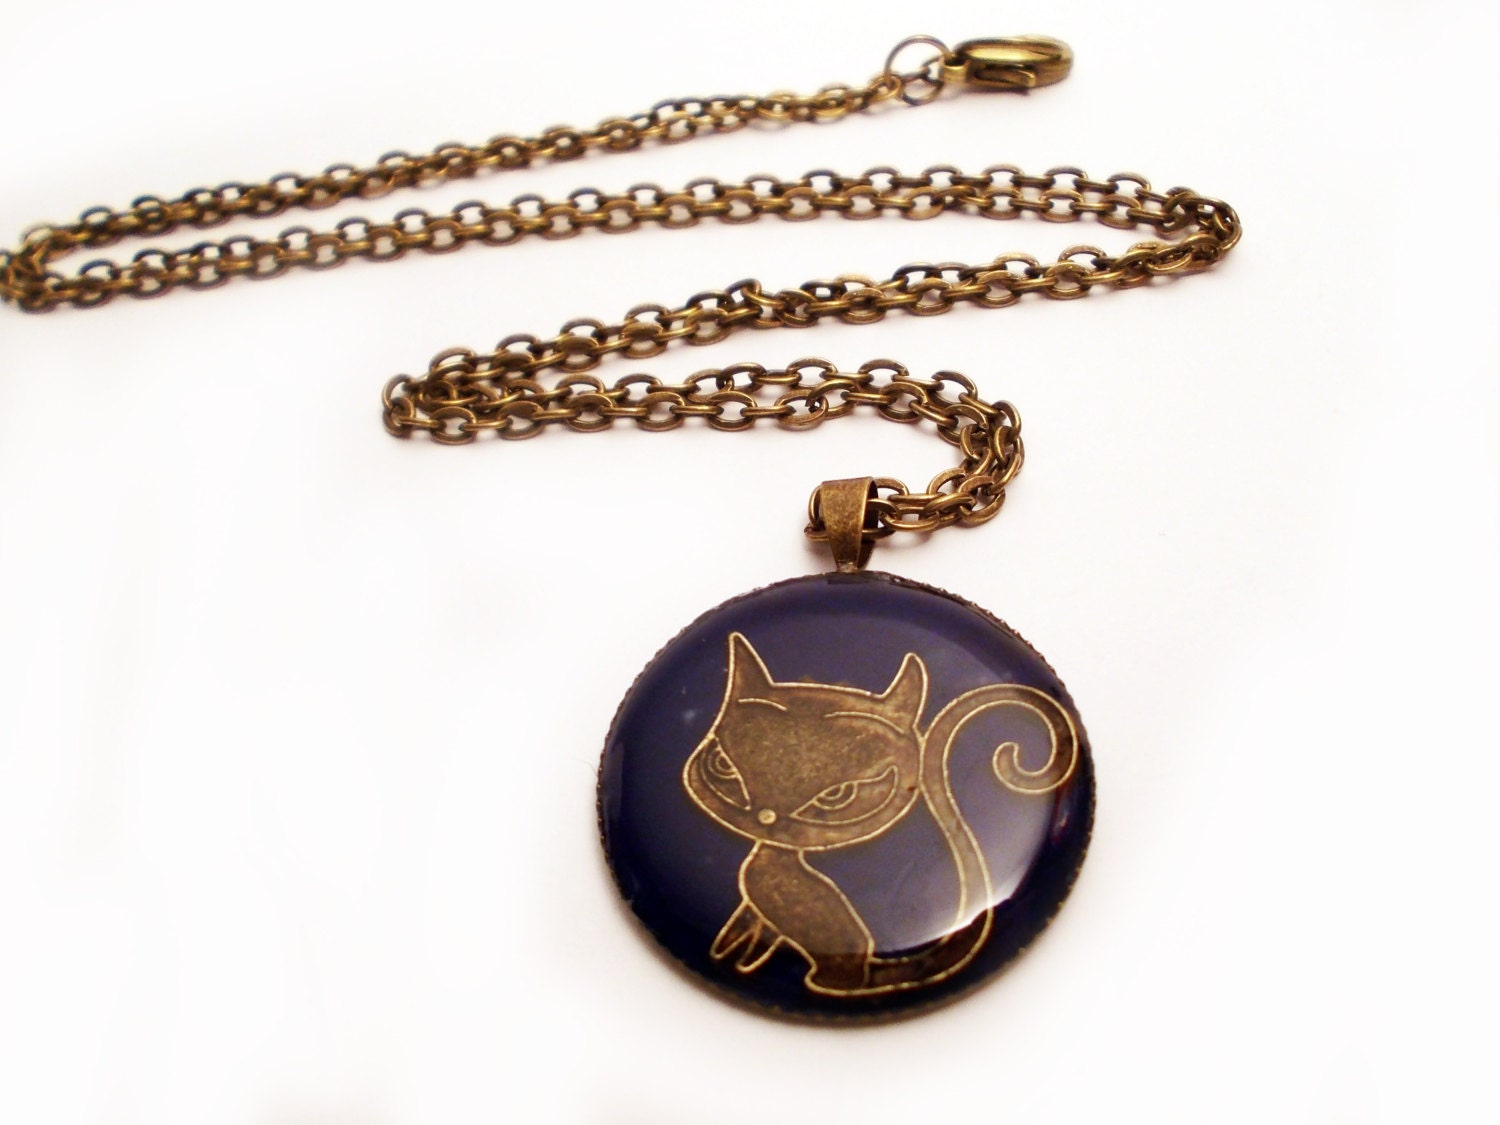 Antique Brass Chain Necklace With A Kitty Cat Resin Pendant Charm